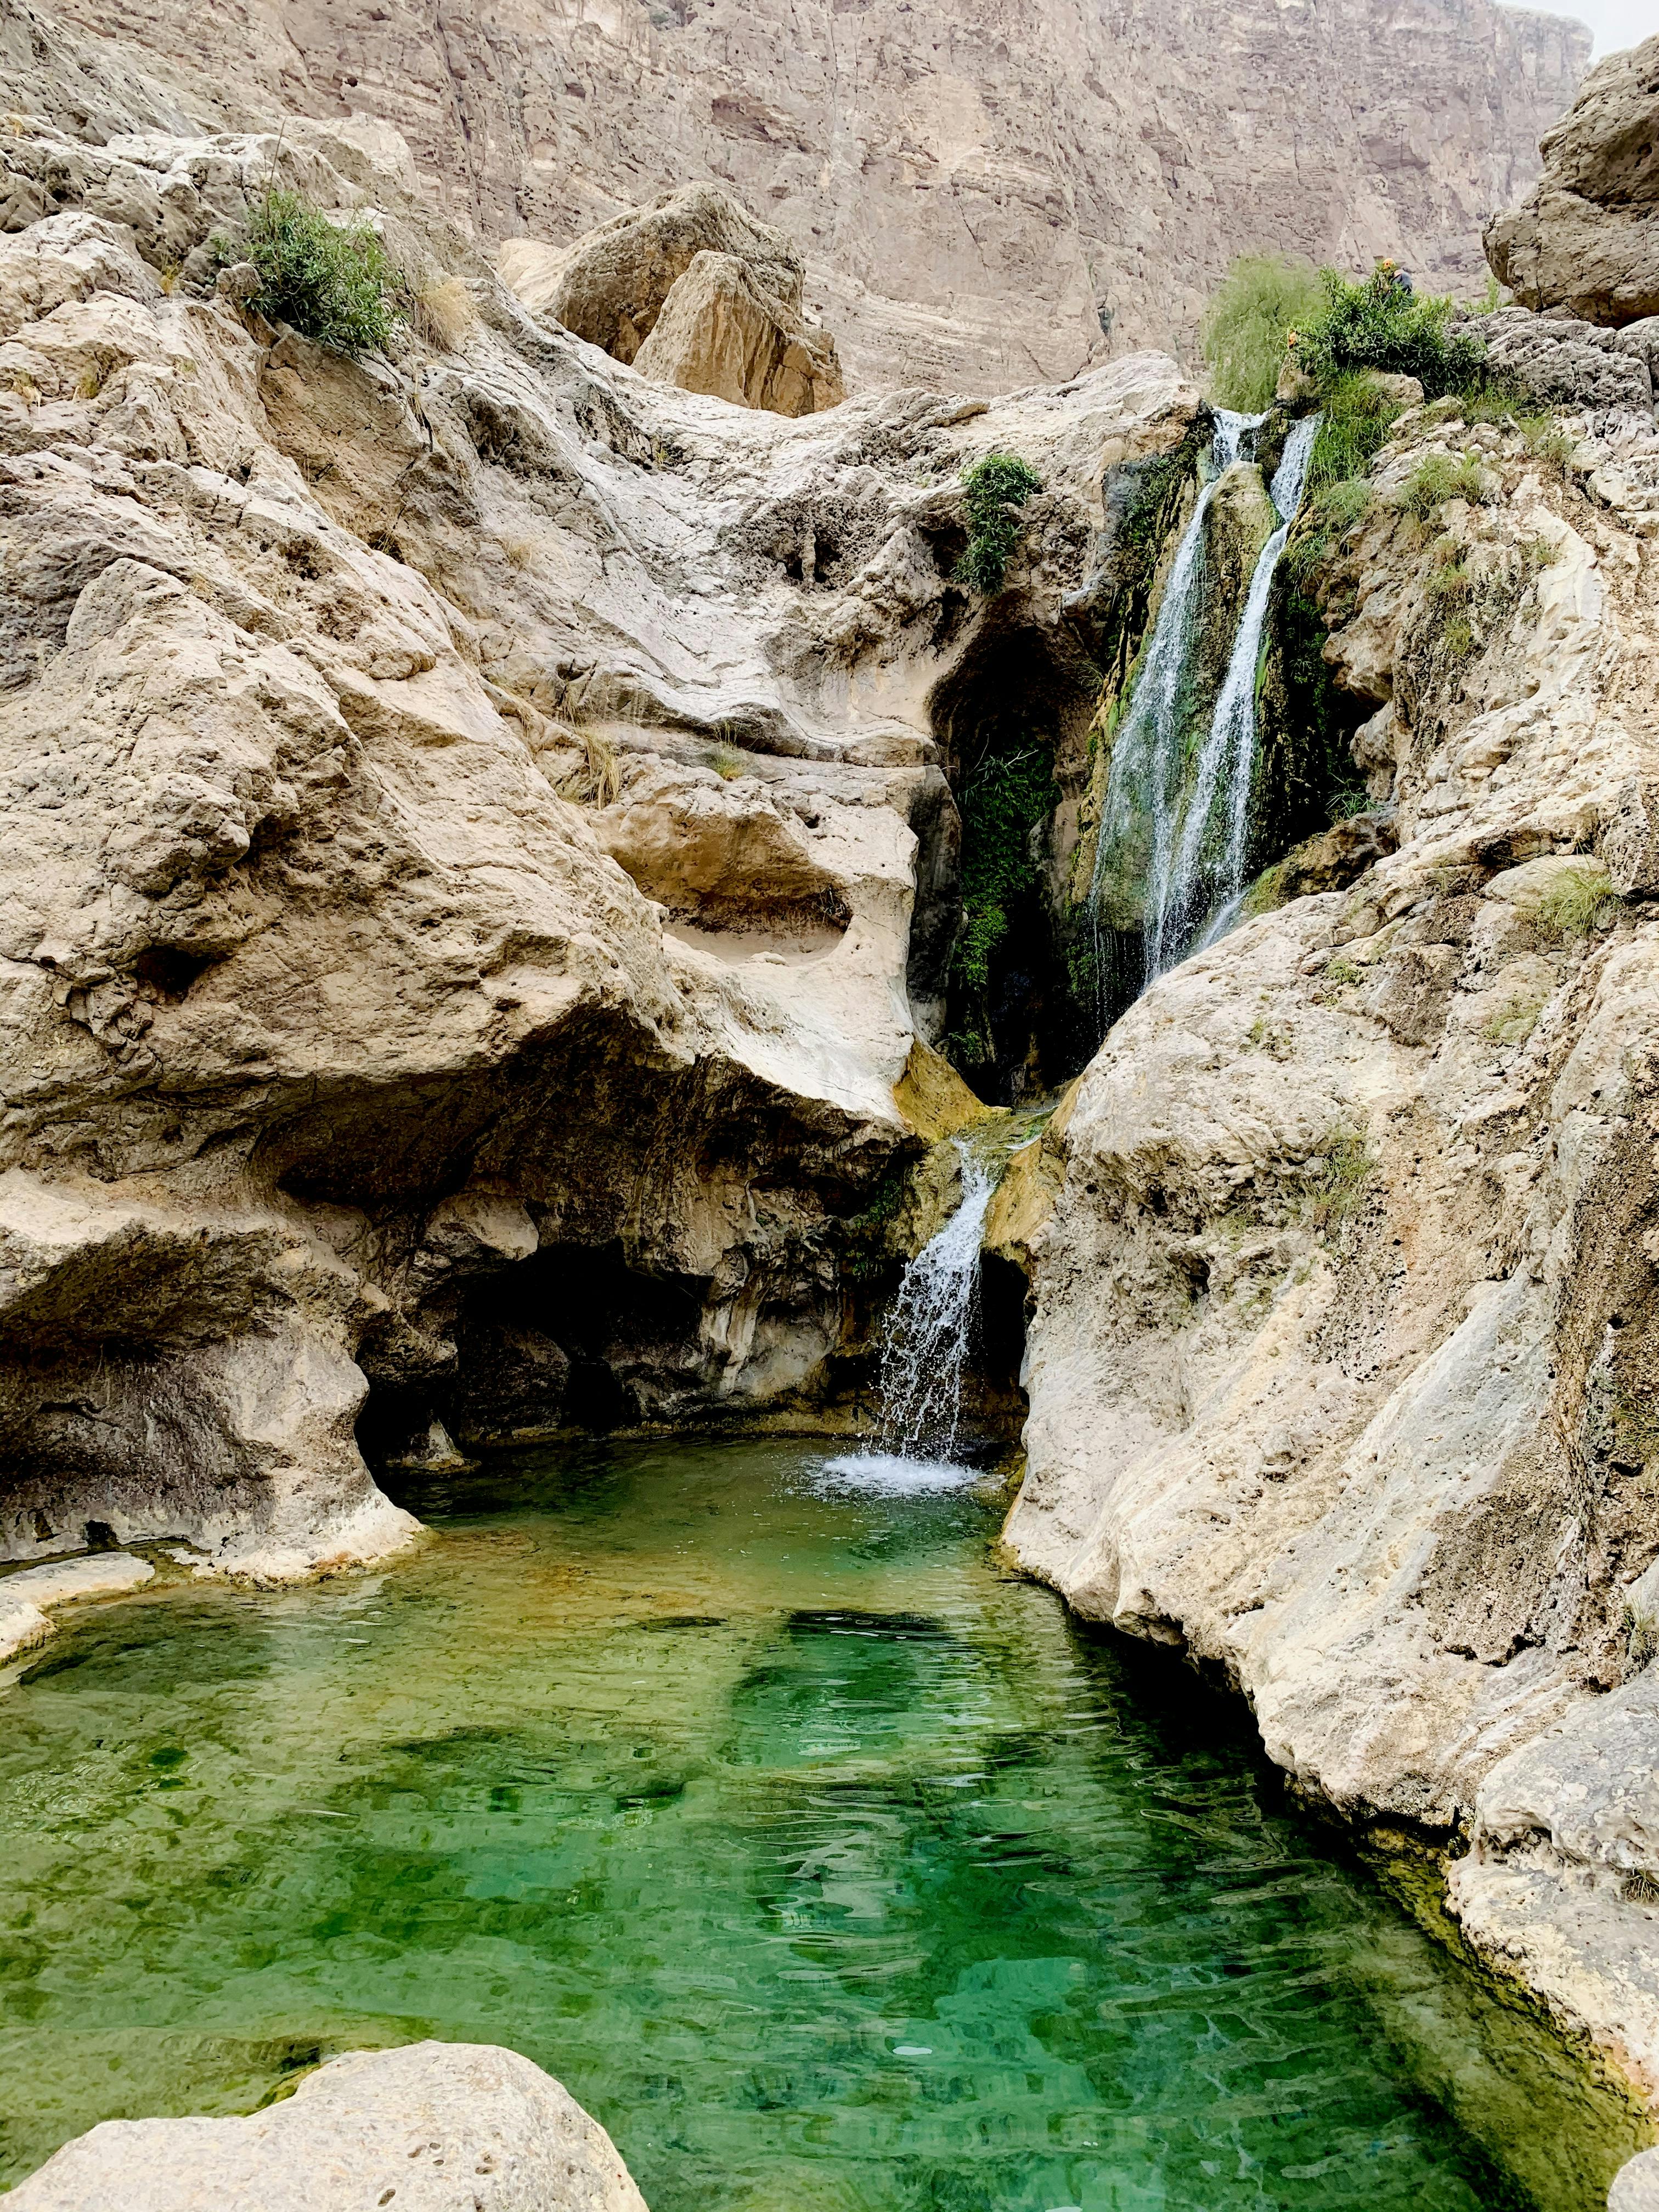 Private tour to Wadi Tiwi Bimmah sinkhole and UNESCO Qalhat from Muscat Musement